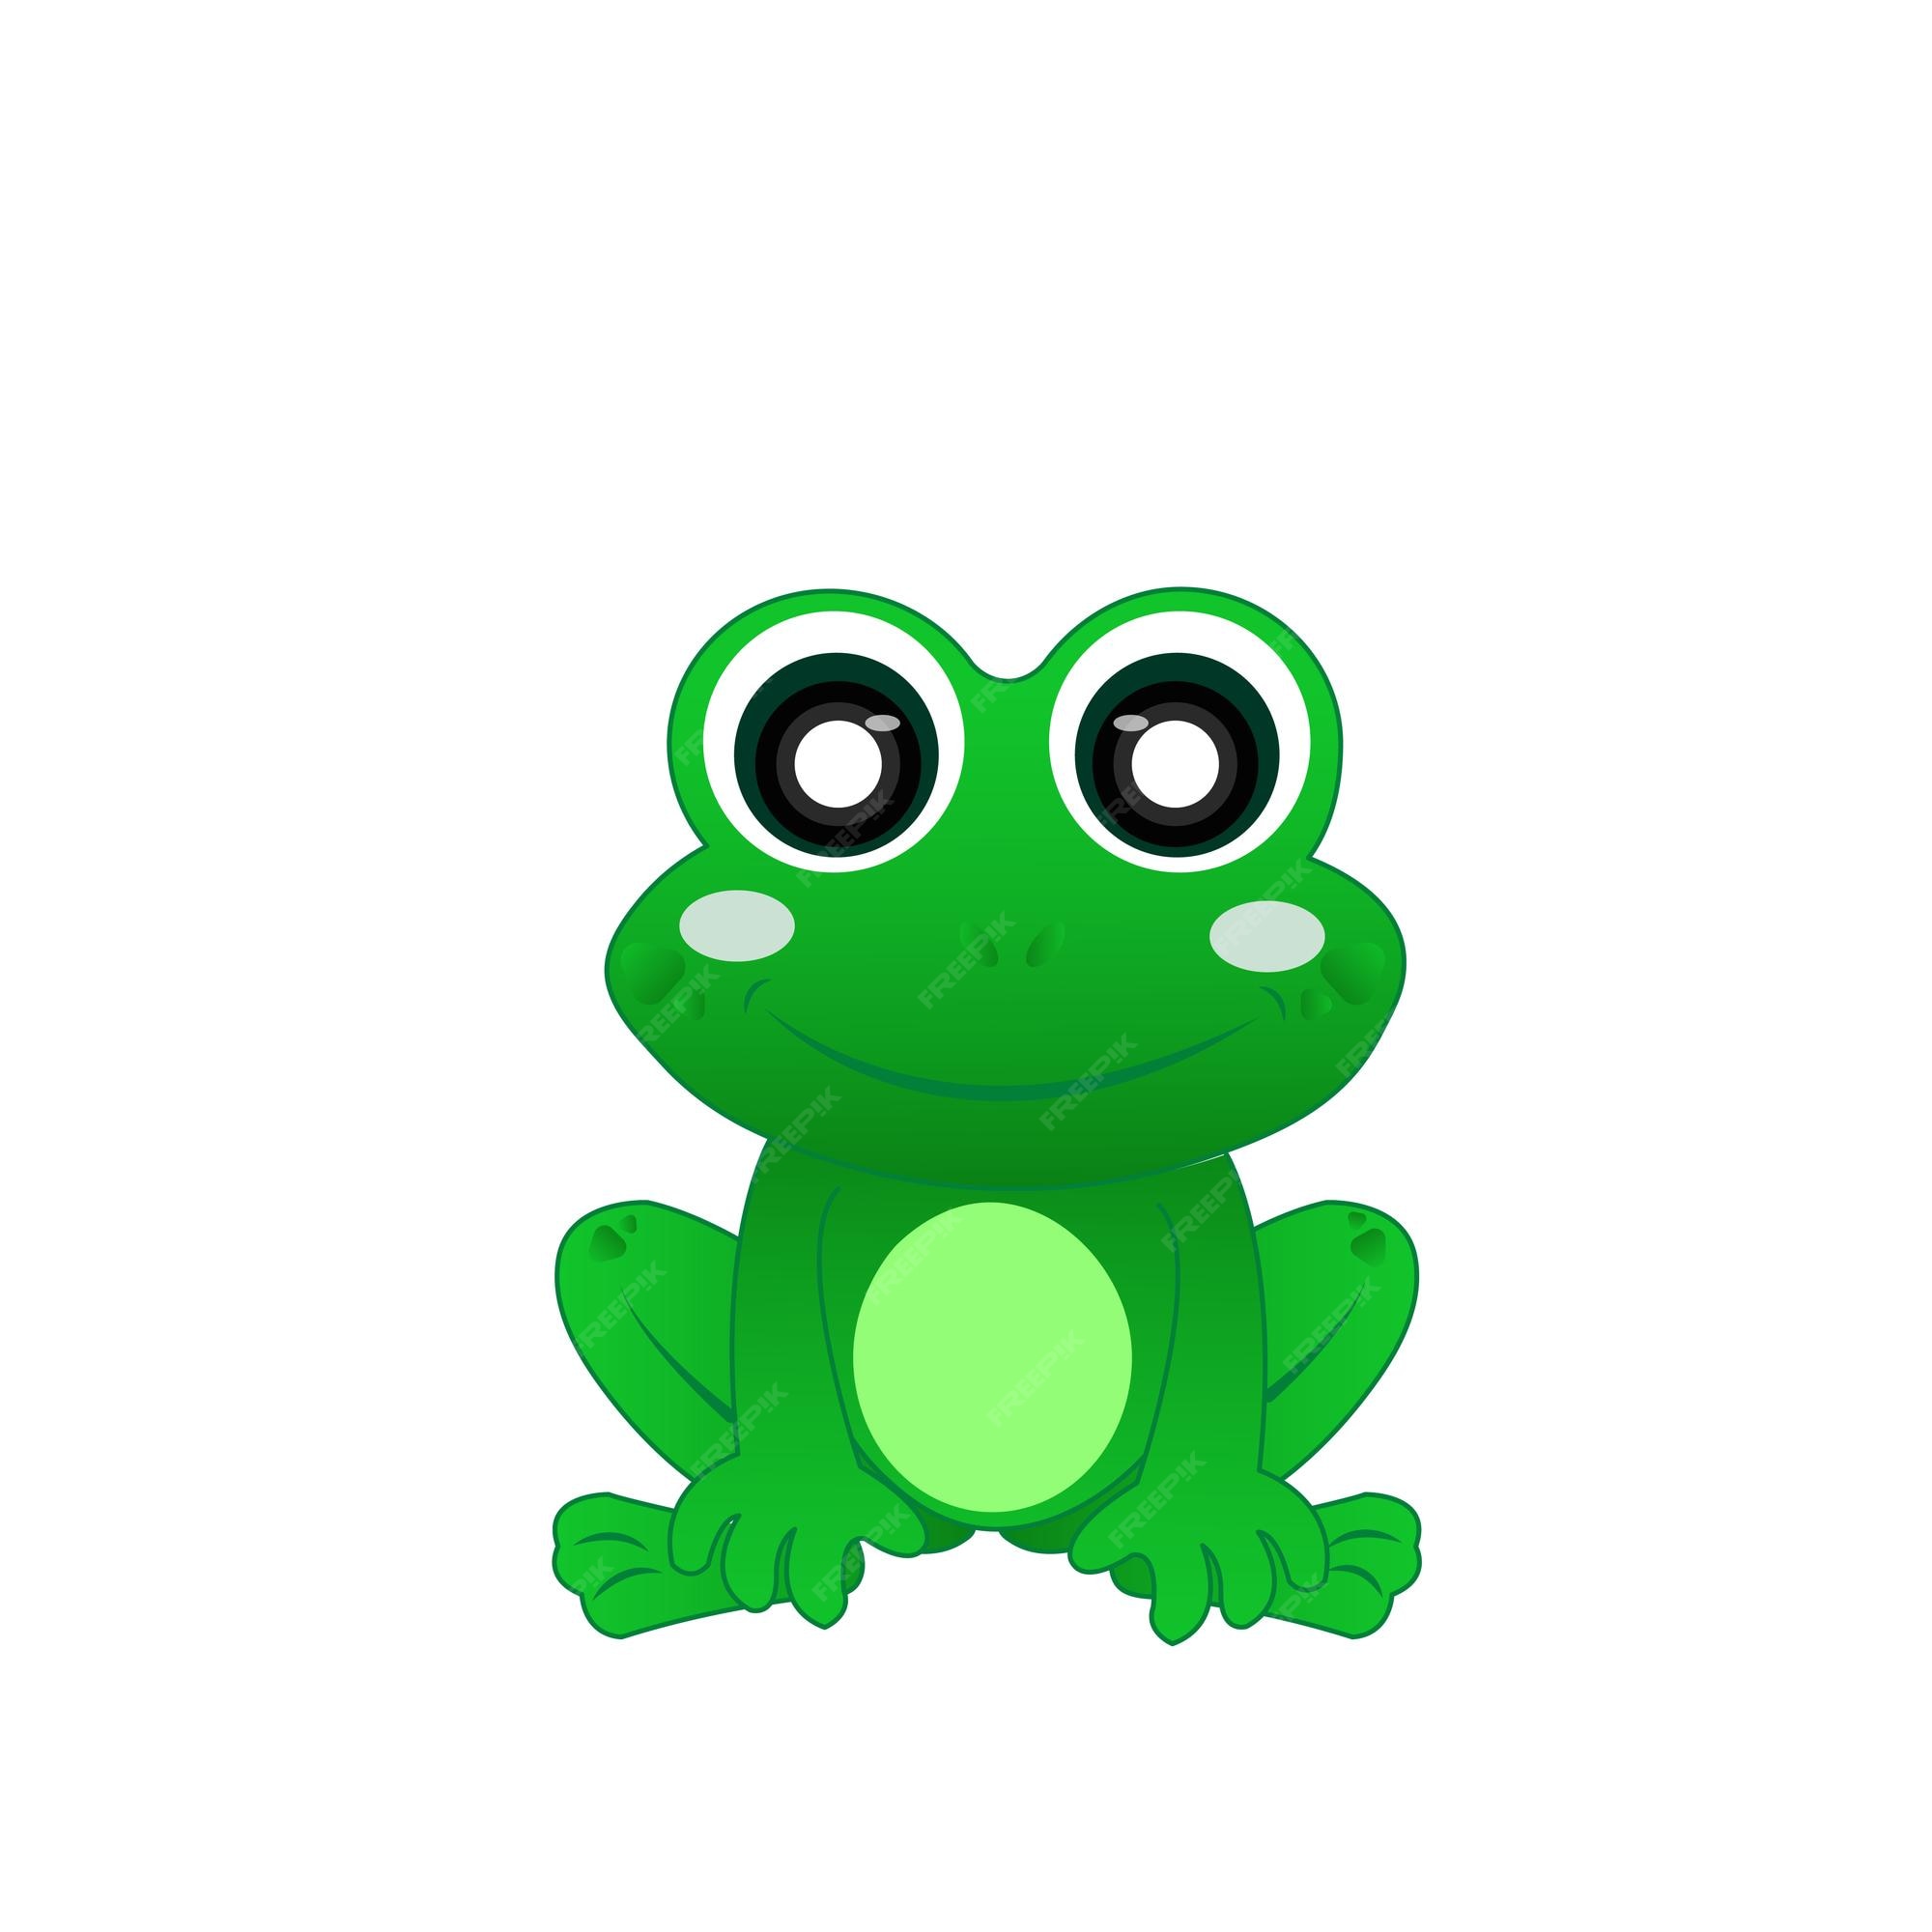 Premium Vector | Cute green frog cartoon character isolated on white  background